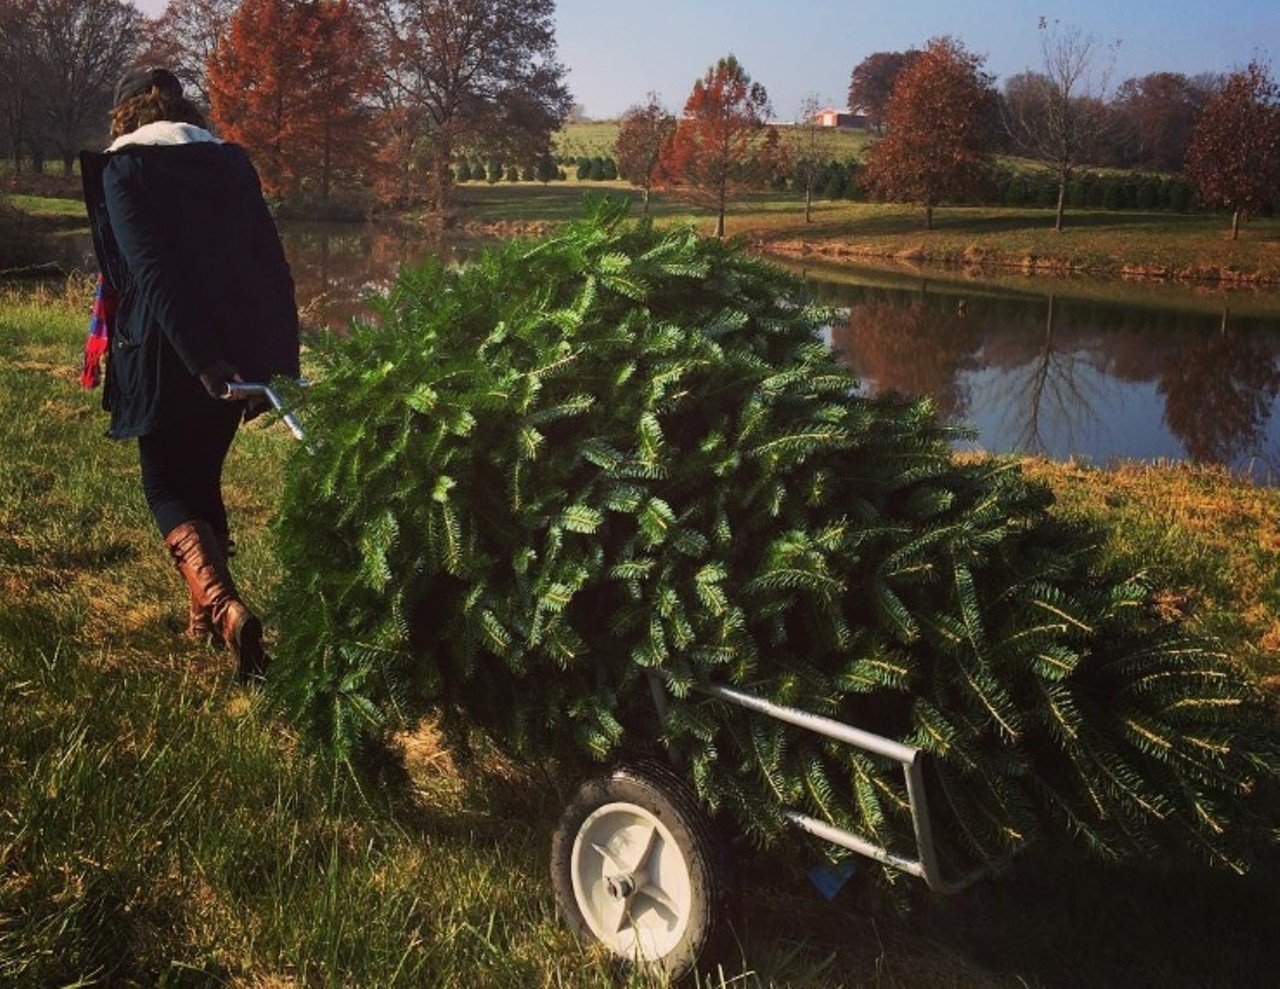 Heritage Valley Tree Farm
1668 4 Mile Rd. 
Washington, MO 63090
(636) 239-7479
The holidays are all about tradition -- and this farm has been family-owned for more than 100 years. Here you can cut your own Christmas tree or select a pre-cut one. Photo courtesy of Instagram / teri_haas.